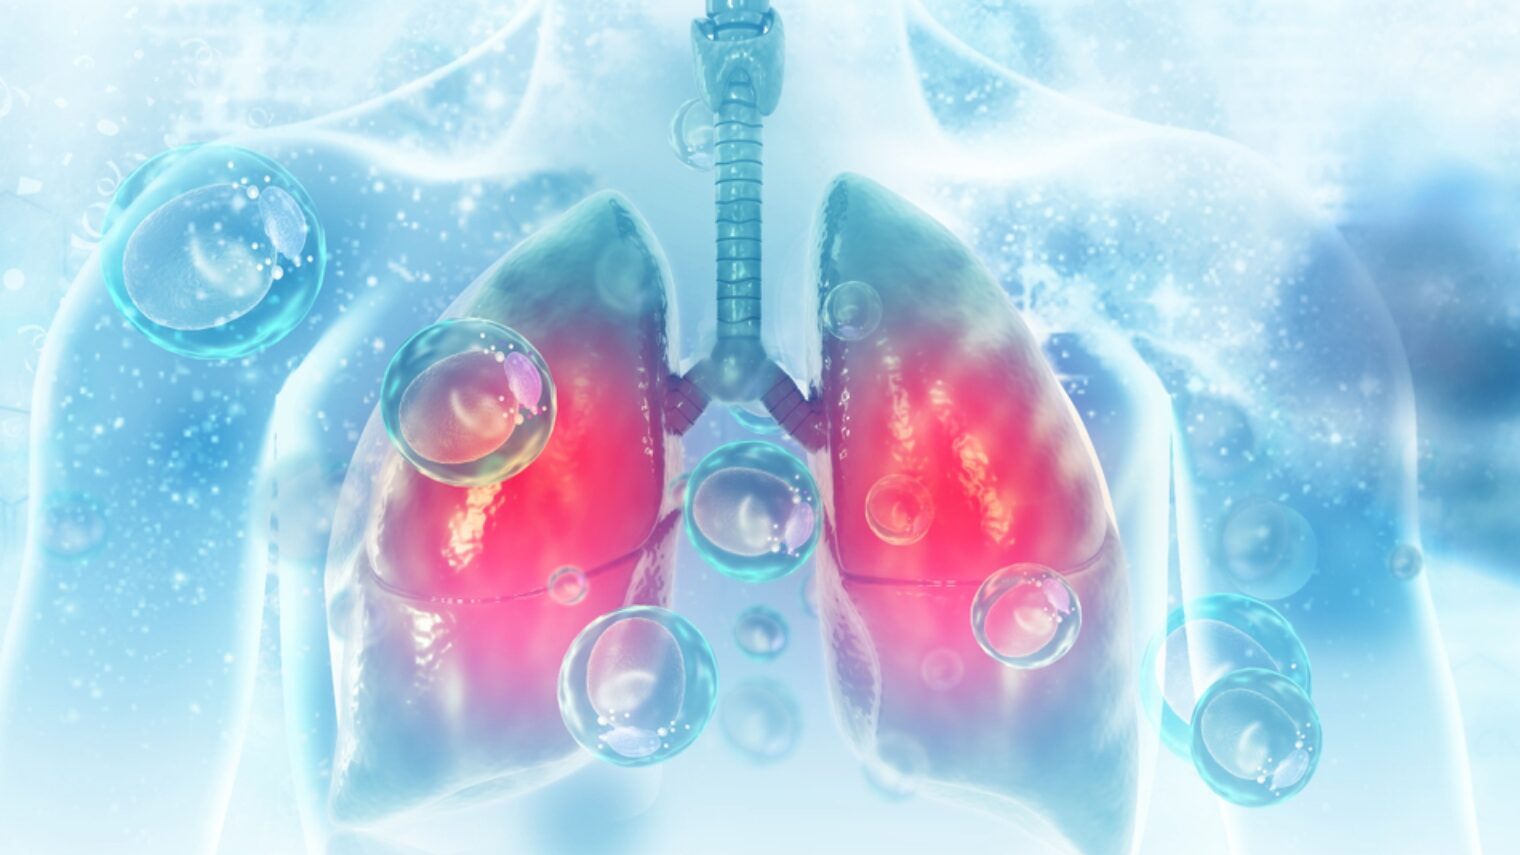 Photo illustration of lungs by Crystal Light via Shutterstock.com